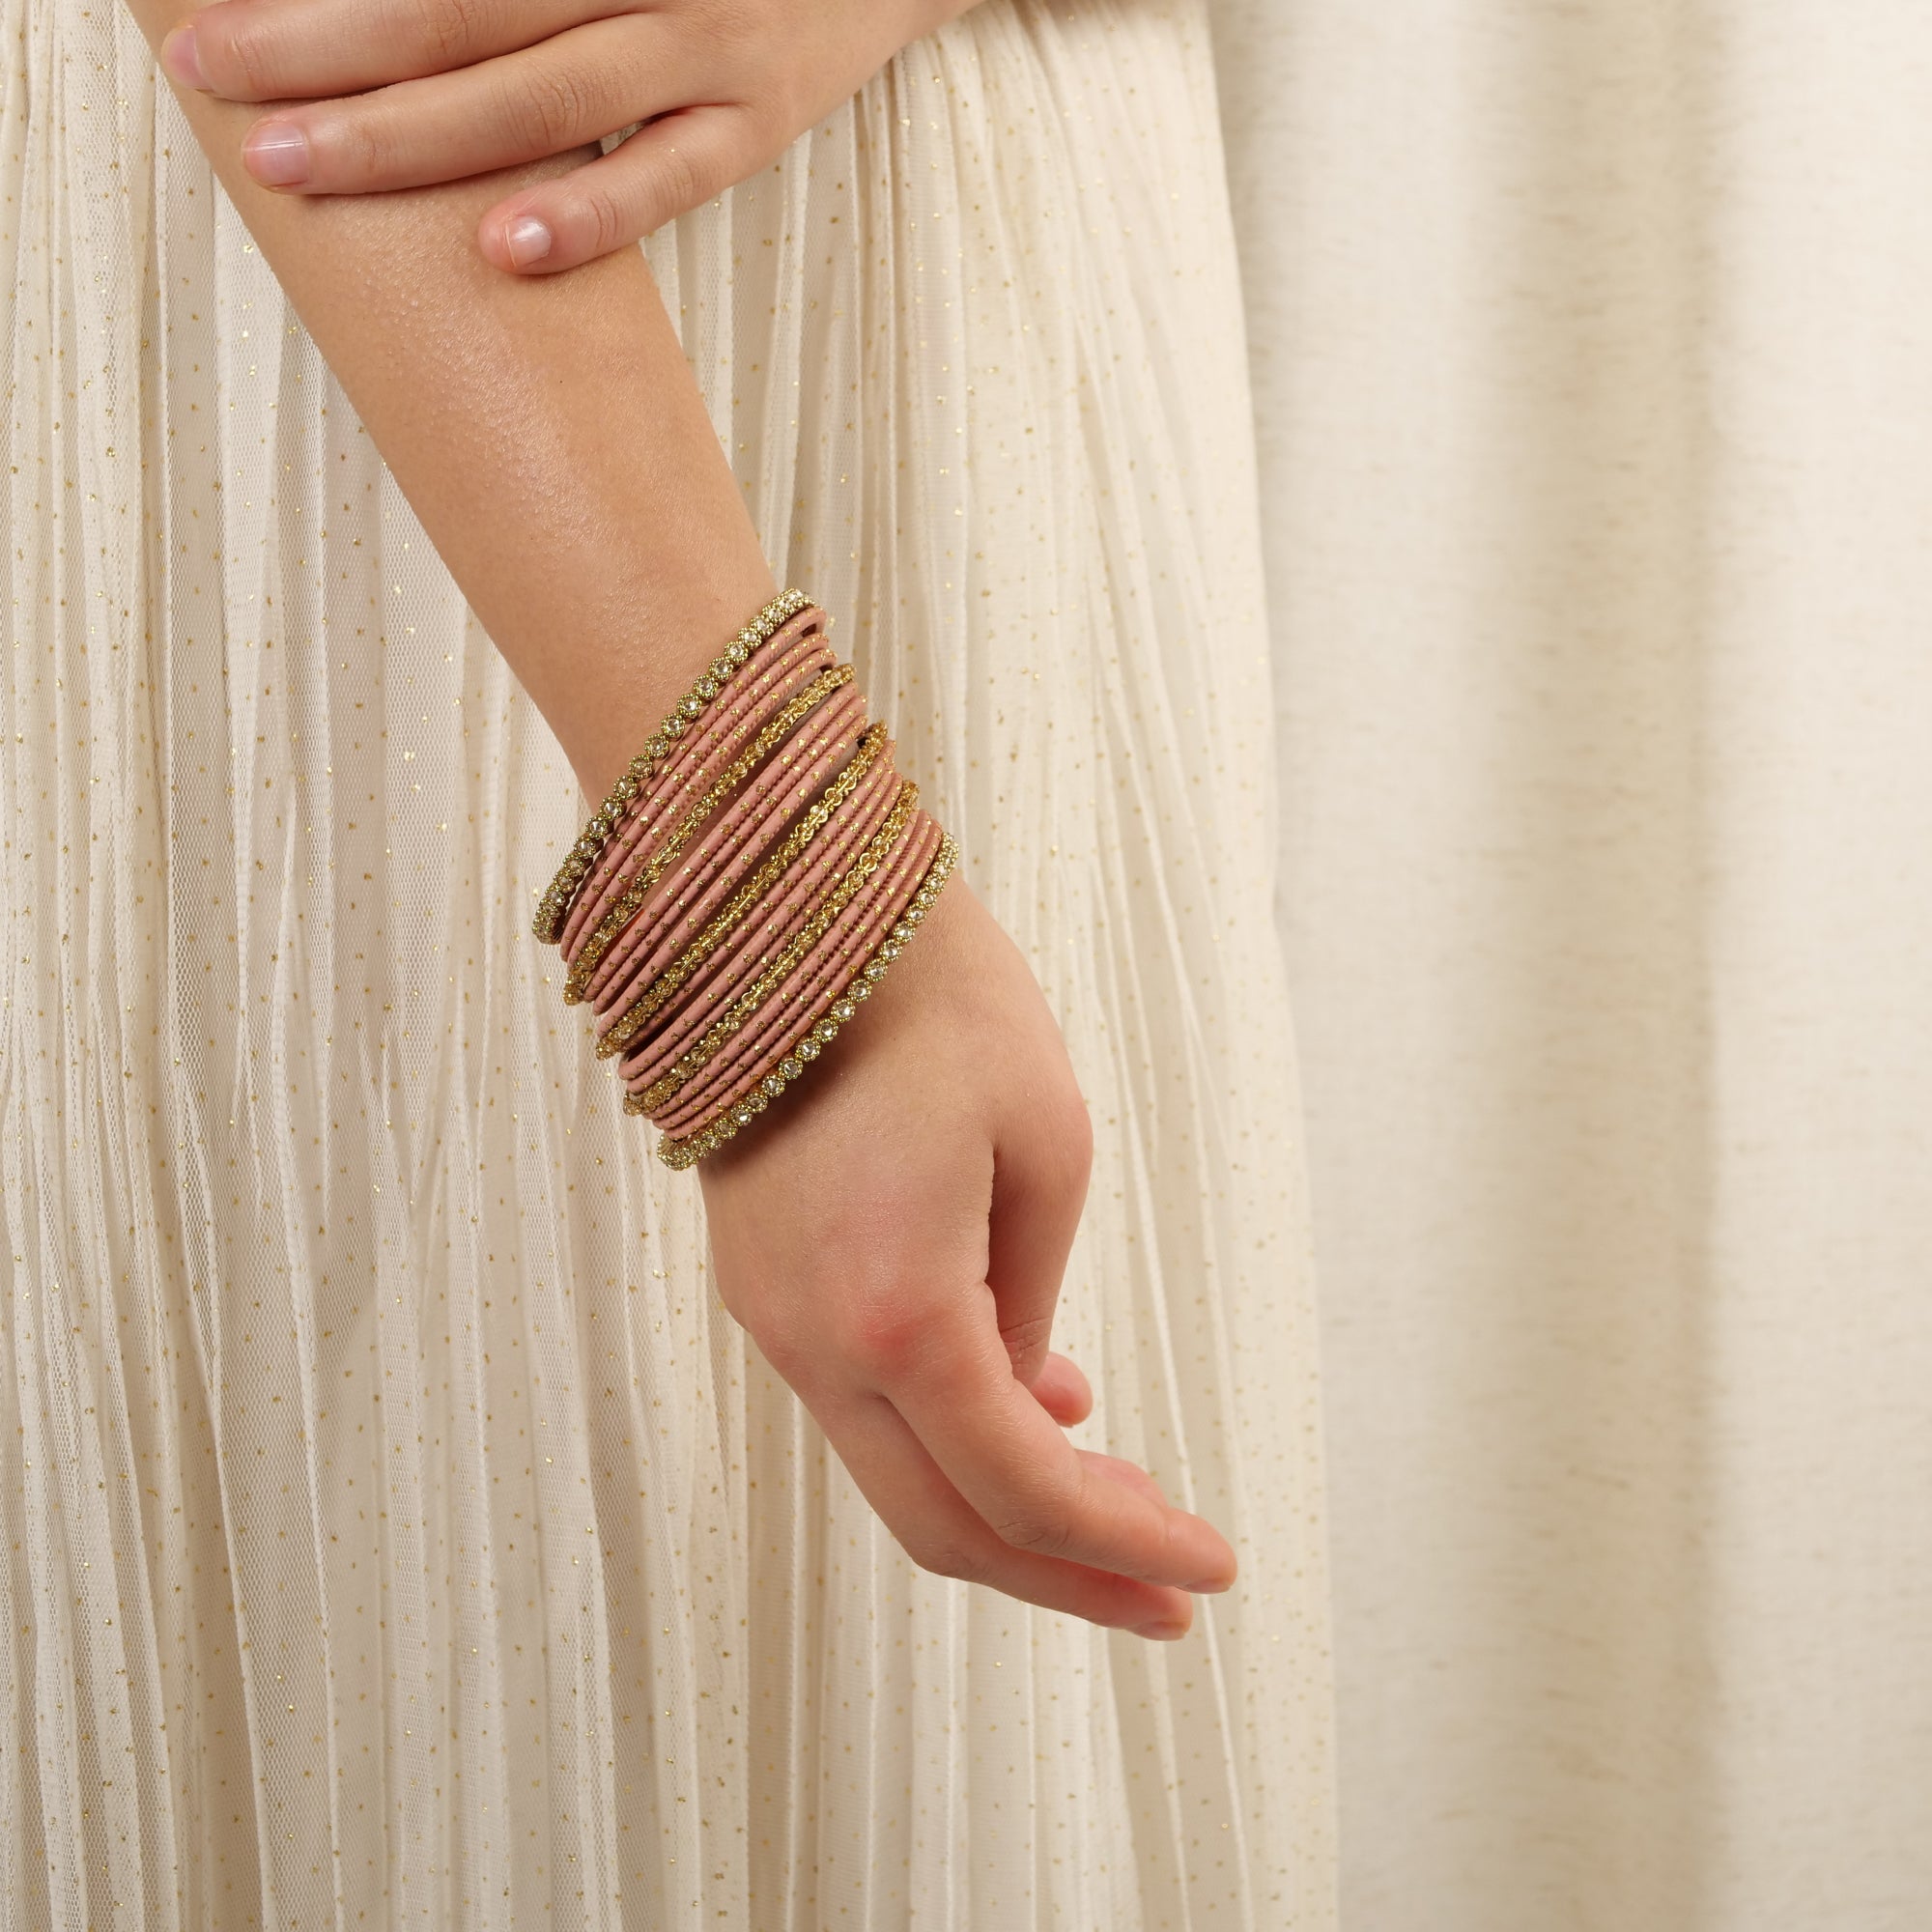 Timeless Antique and Terracotta Bangle Set